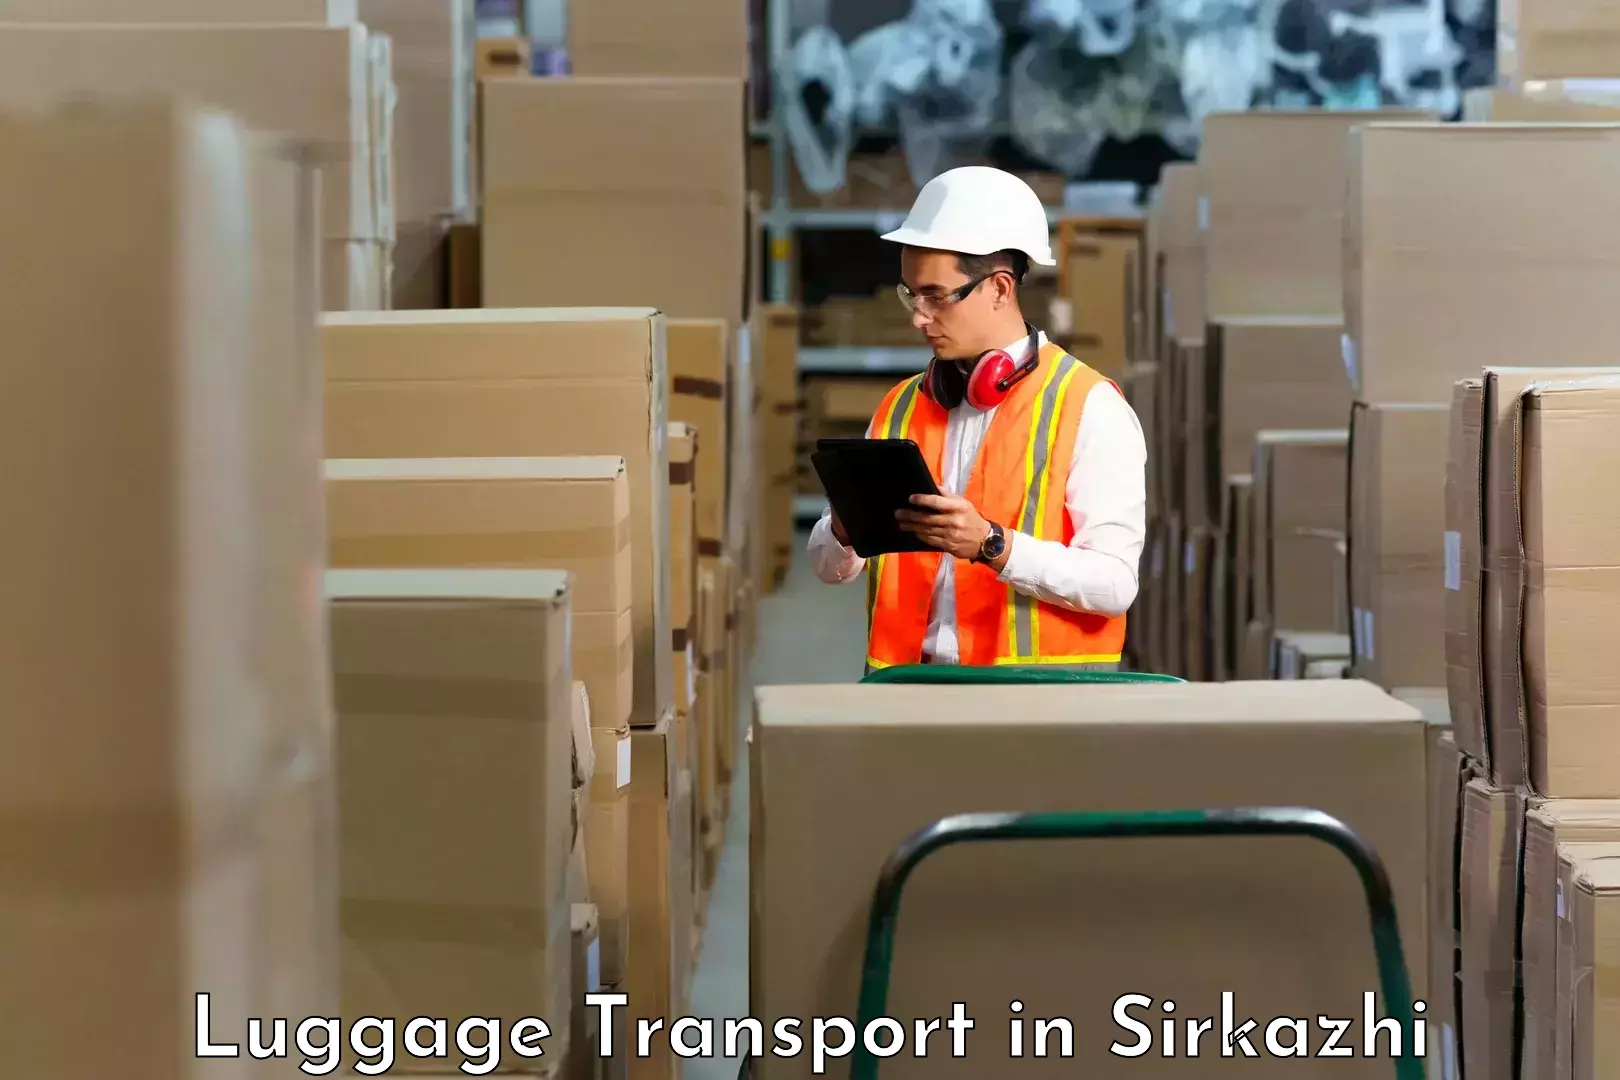 Luggage storage and delivery in Sirkazhi